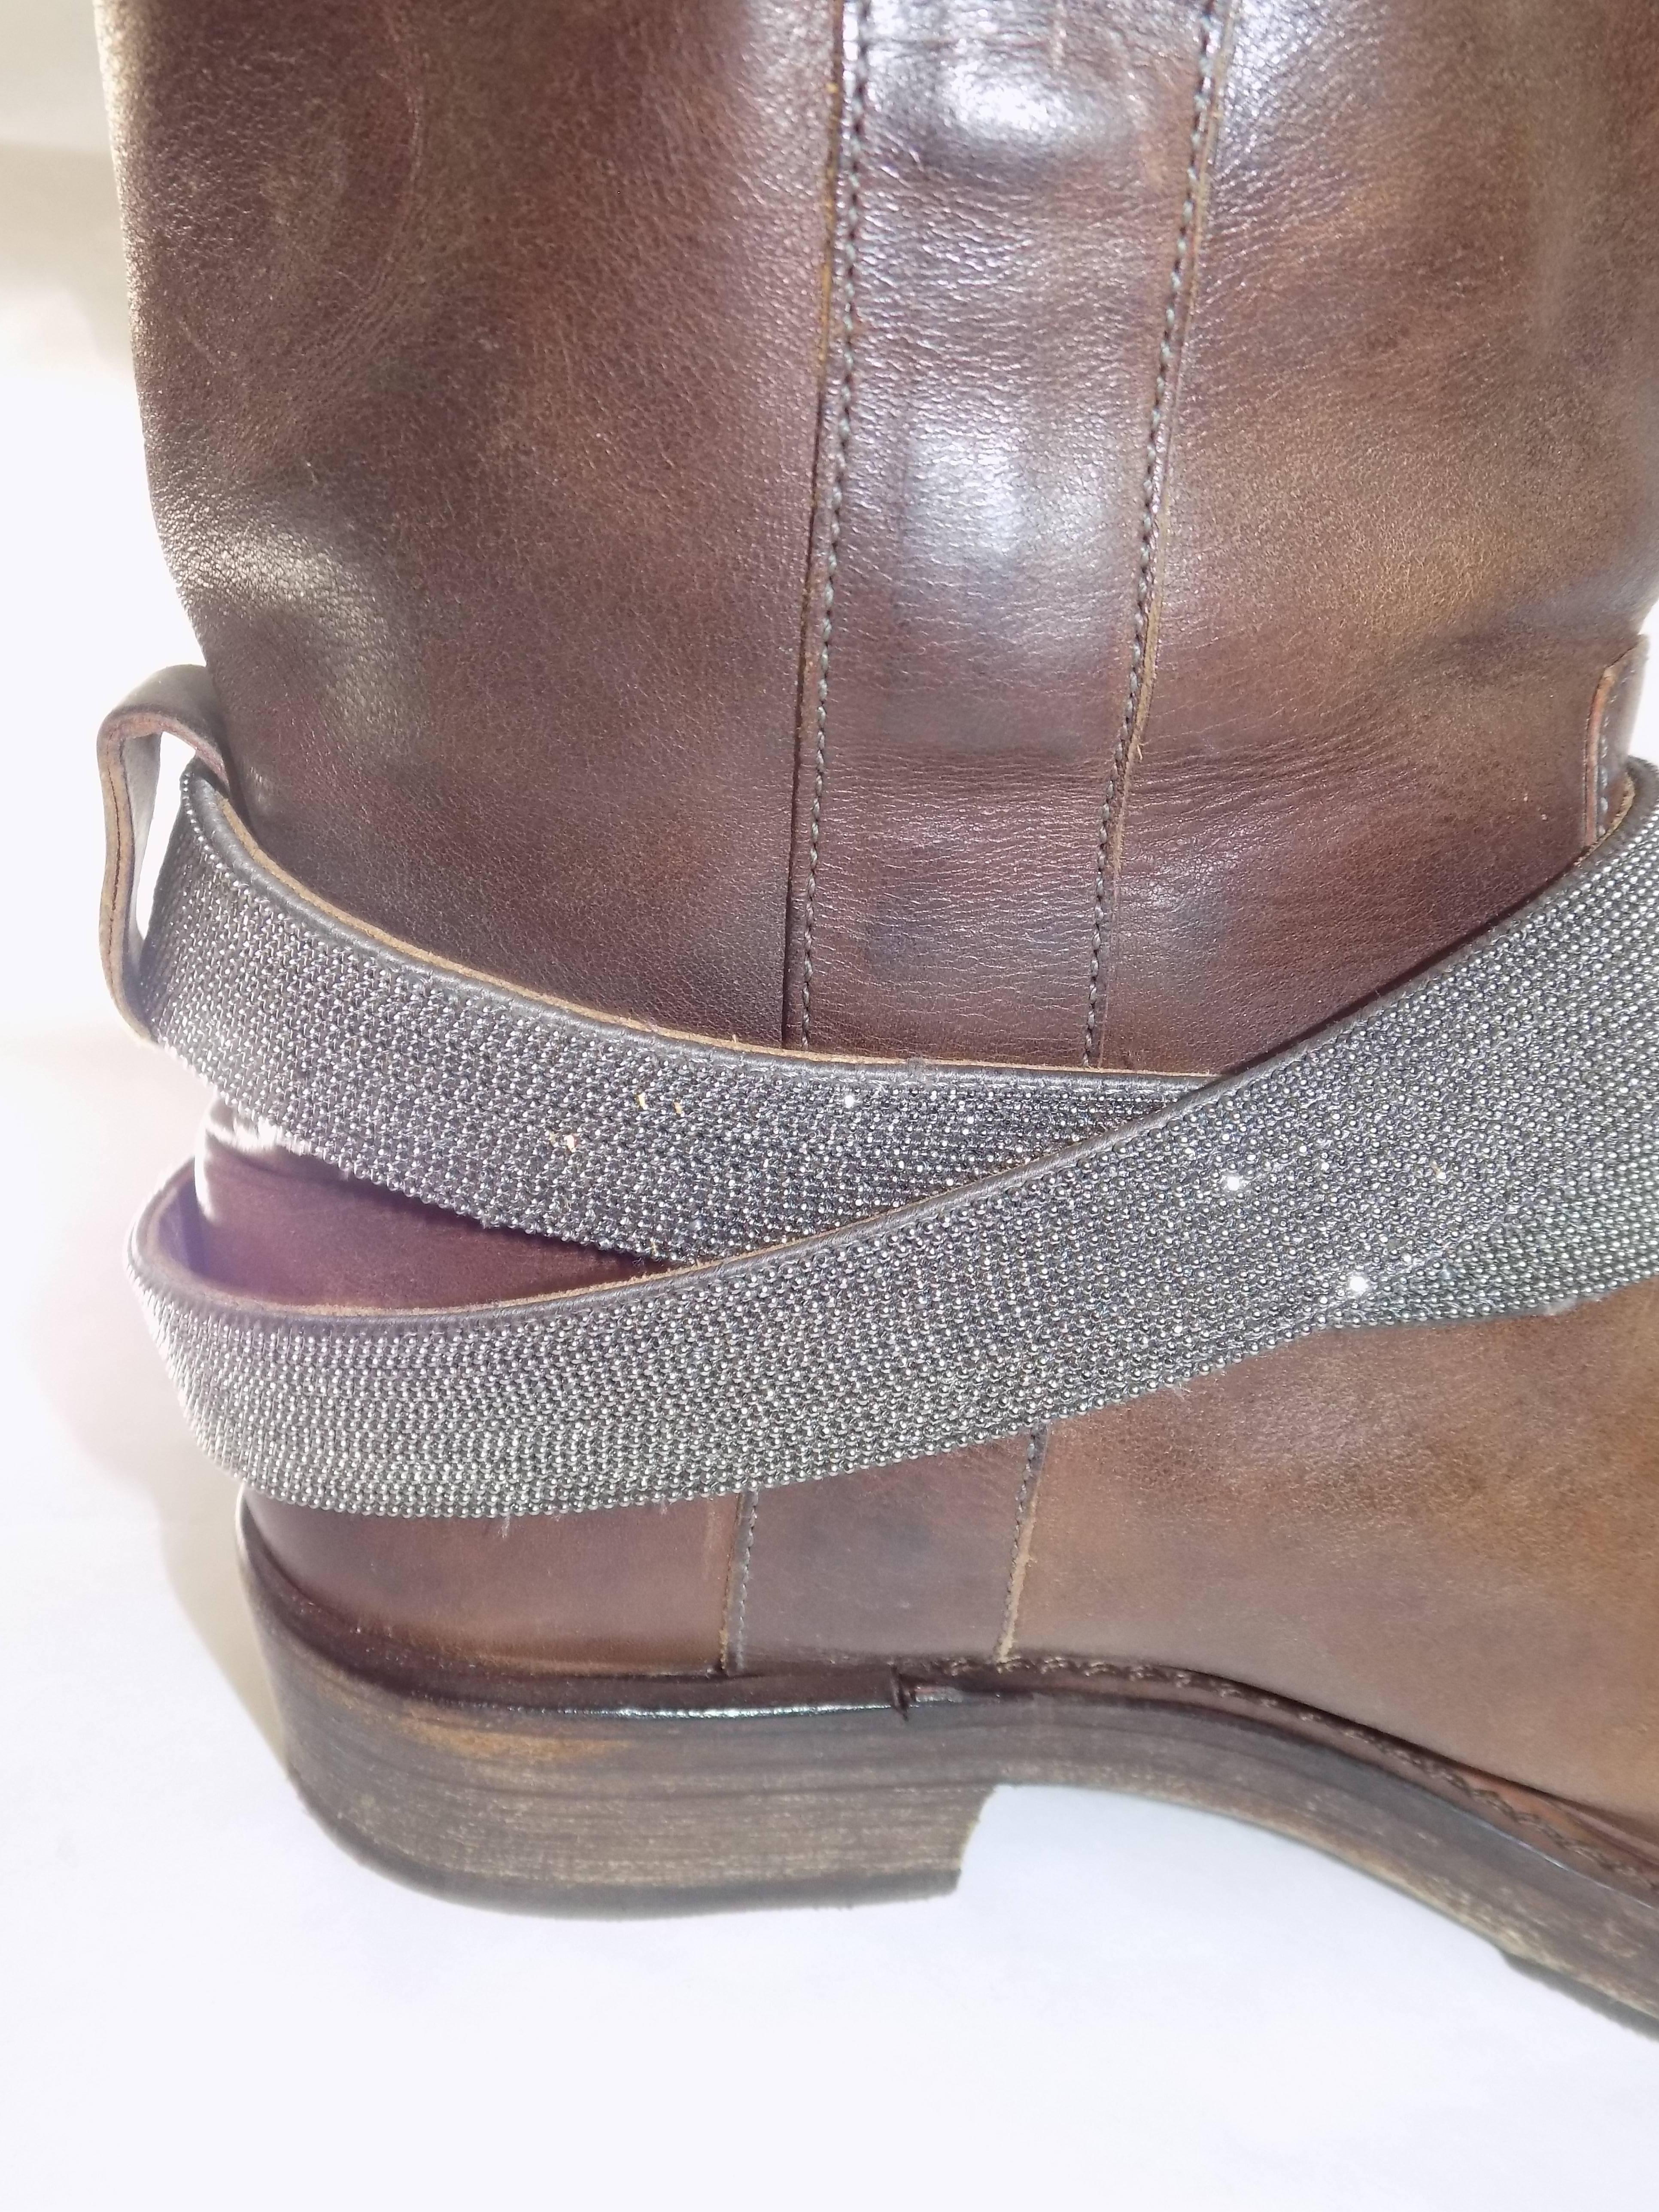 Brunello Cucinelli Leather Boots with Monili Strap Sold out Ret $1945 1